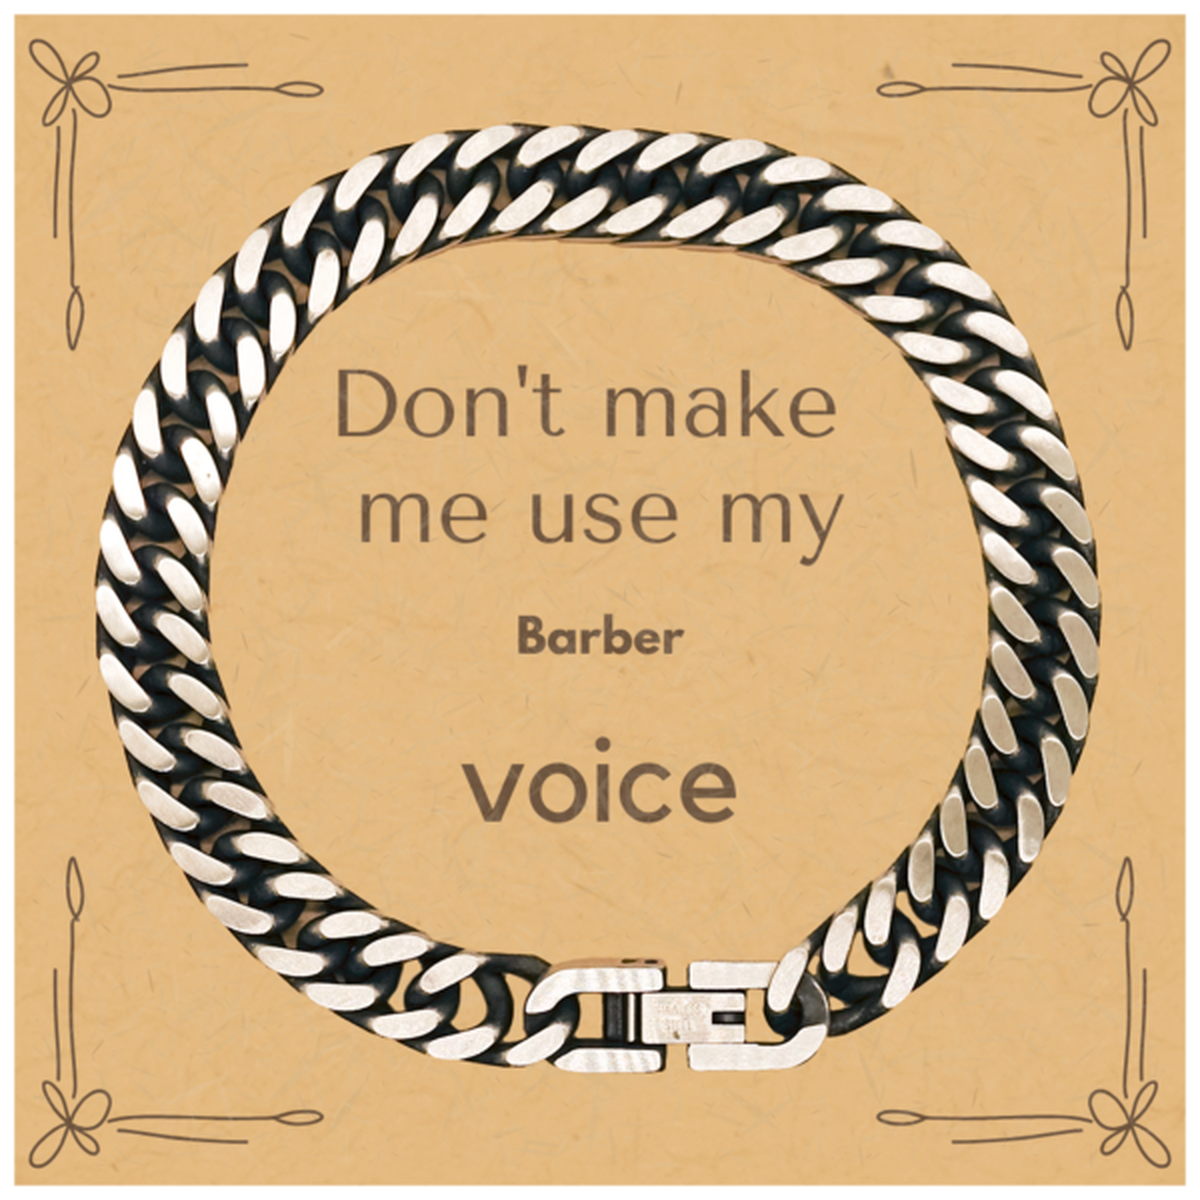 Don't make me use my Barber voice, Sarcasm Barber Card Gifts, Christmas Barber Cuban Link Chain Bracelet Birthday Unique Gifts For Barber Coworkers, Men, Women, Colleague, Friends